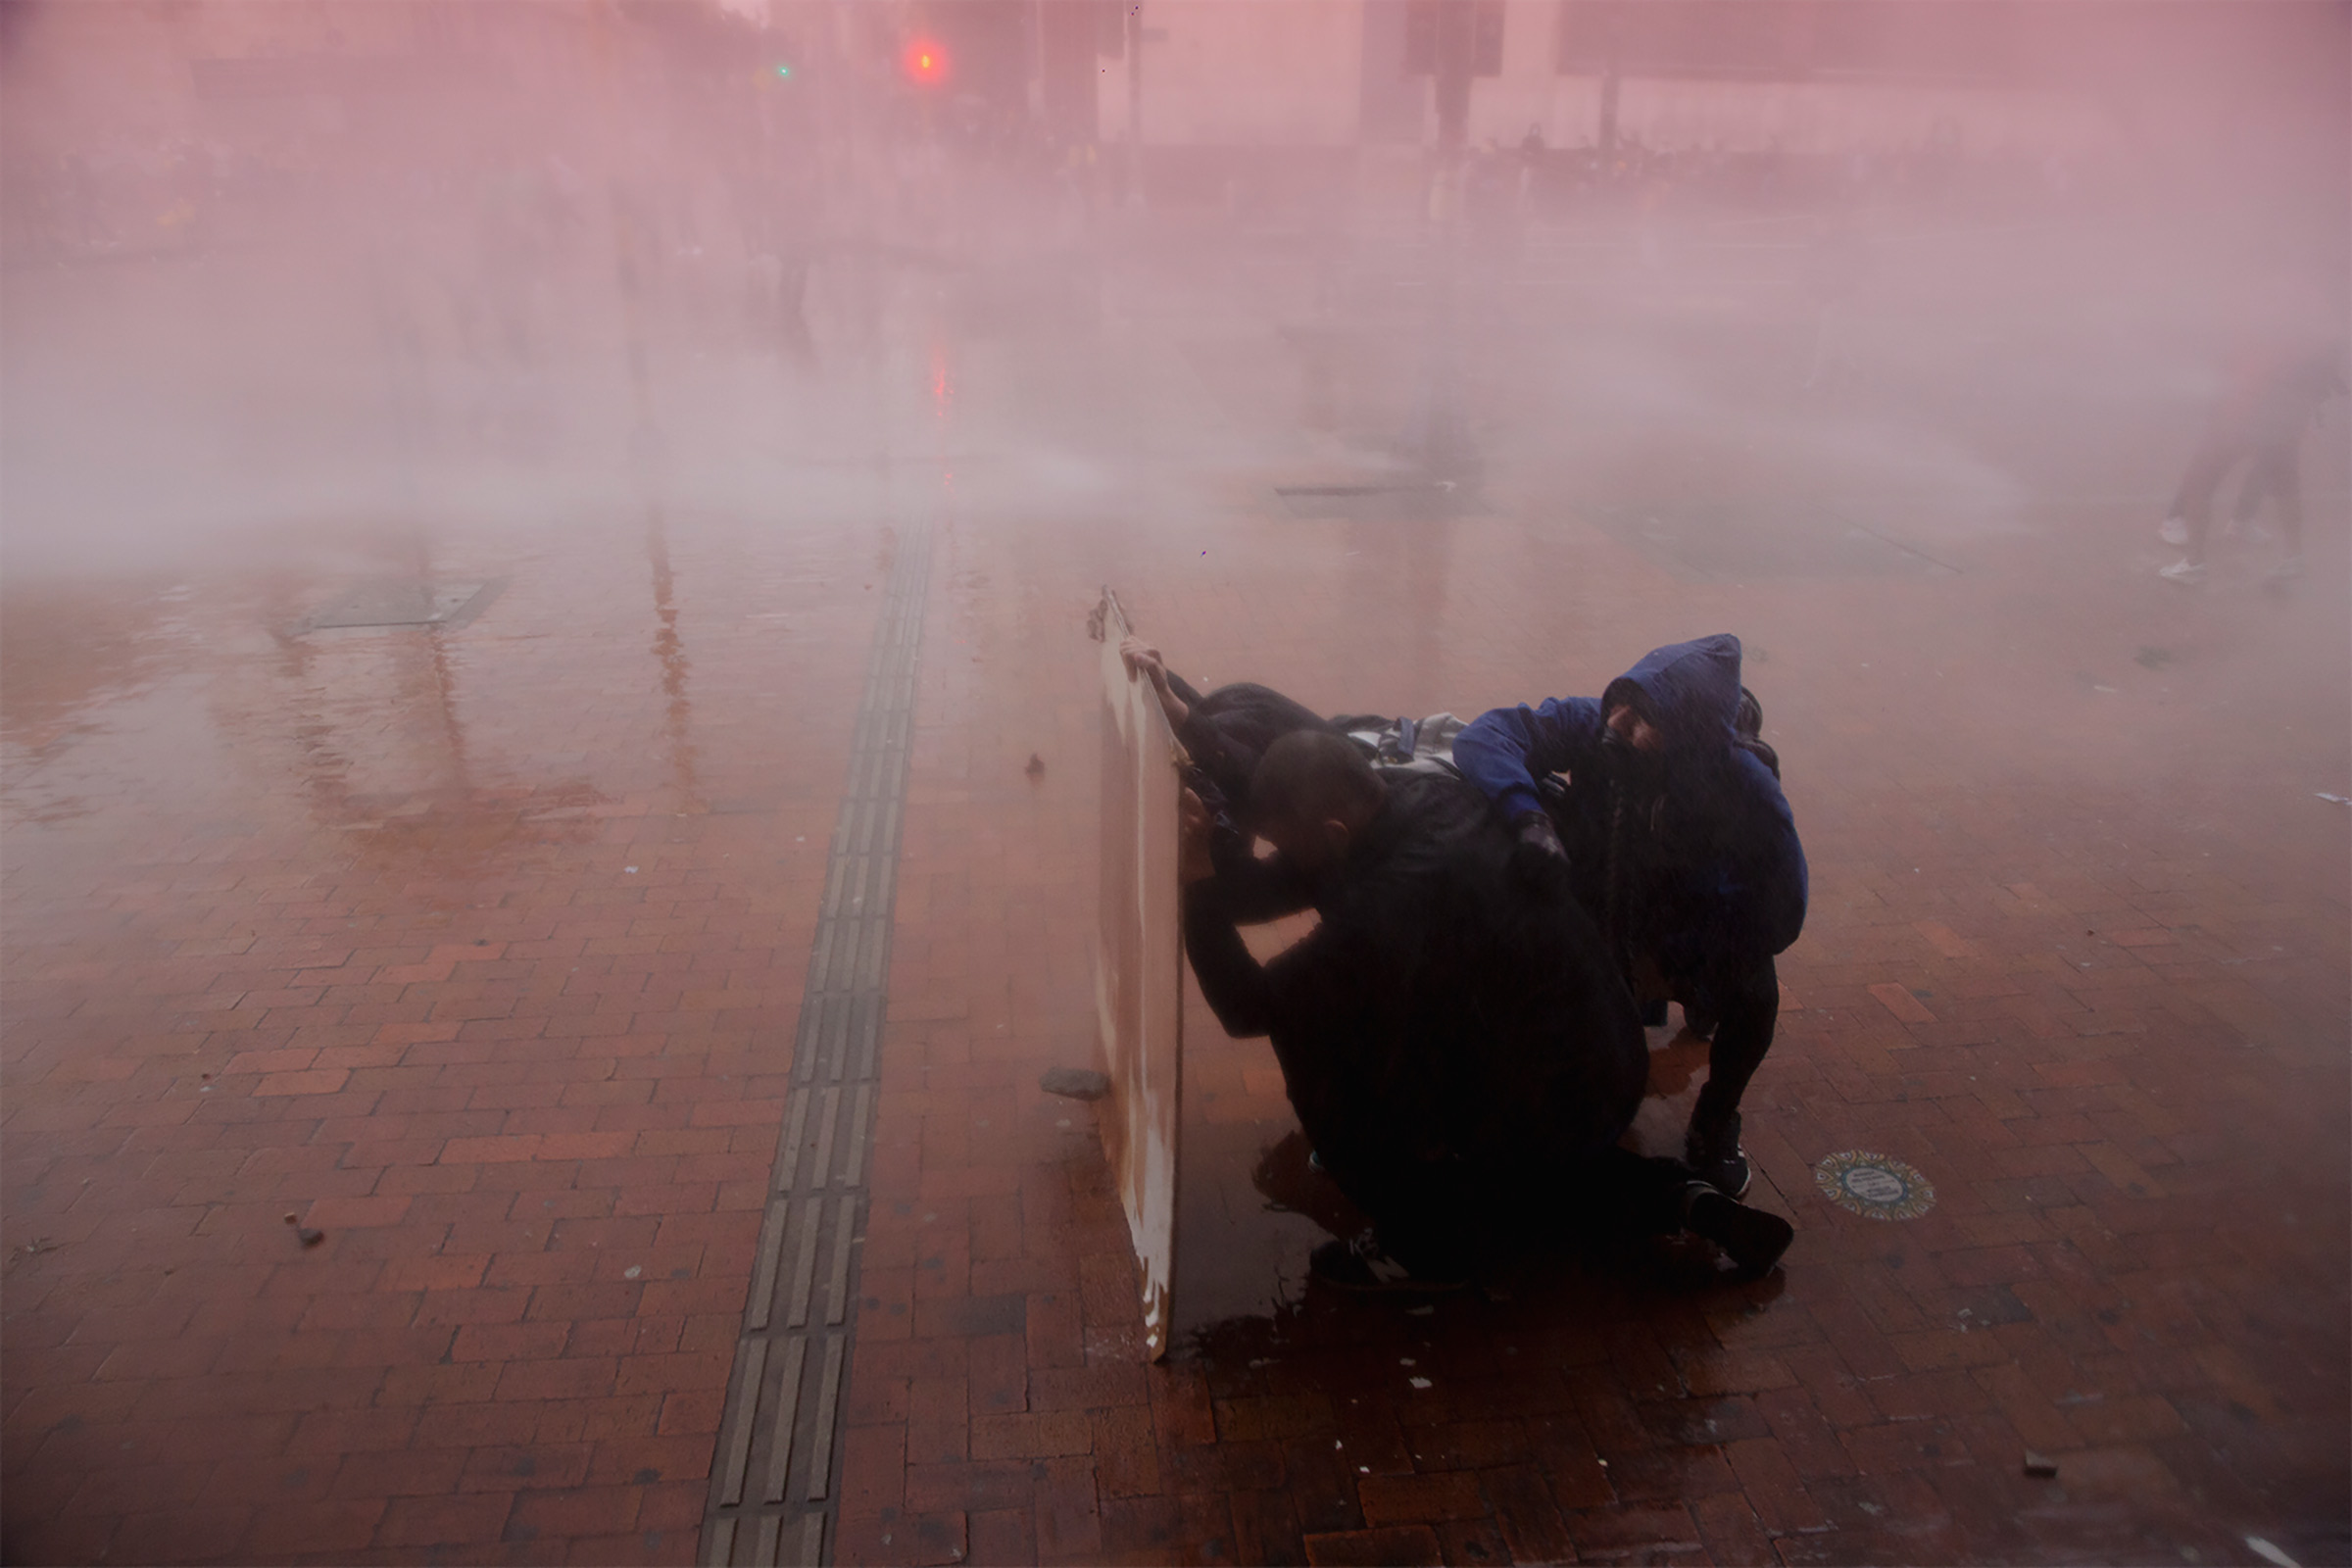 Riot police vehicles fire a water cannon to disperse the protesters in Bogotá on May 5. (Paula Thomas—Reojo Colectivo)